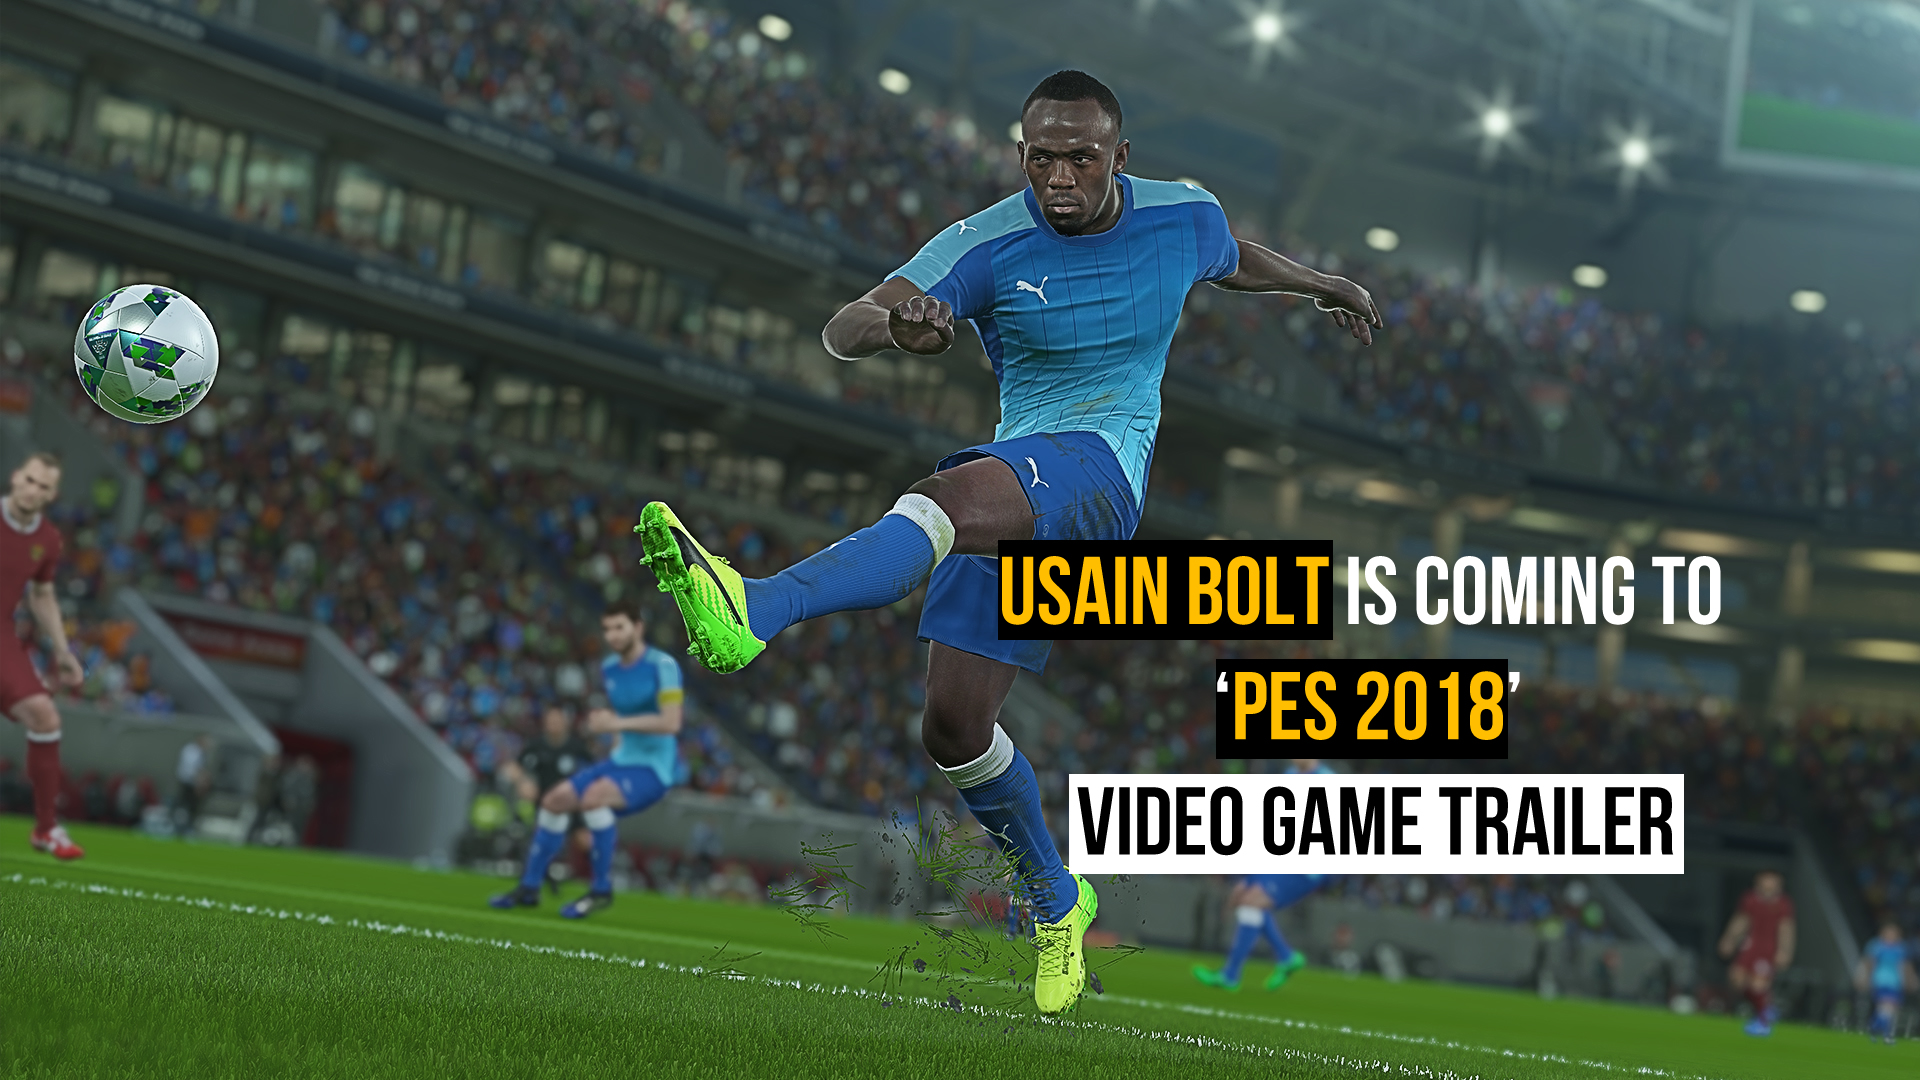 Usain Bolt will join Messi and Neymar in 'PES 2018' Video Game